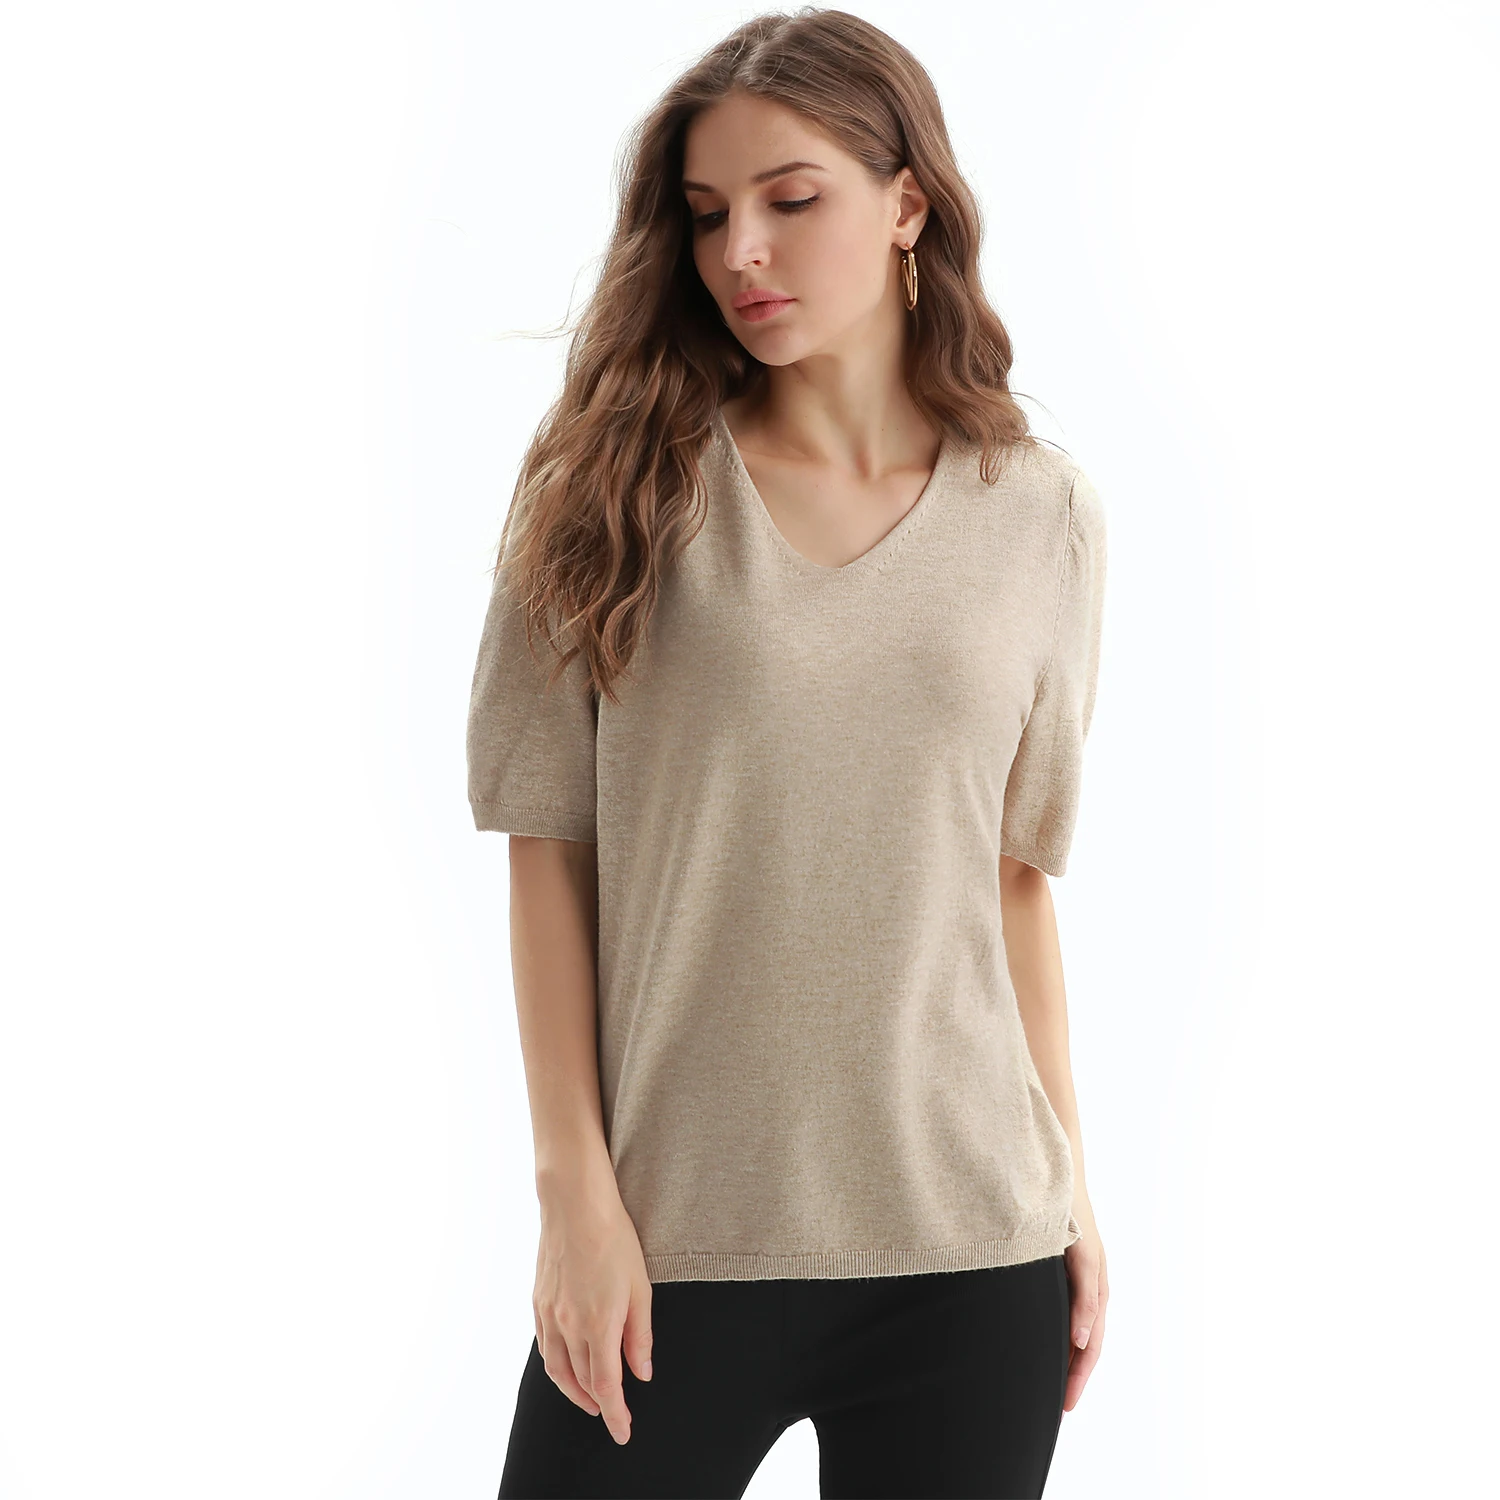 2021 Hot Selling Short Sleeve V Neck Jersey Sweater Knitted Shirt For Women